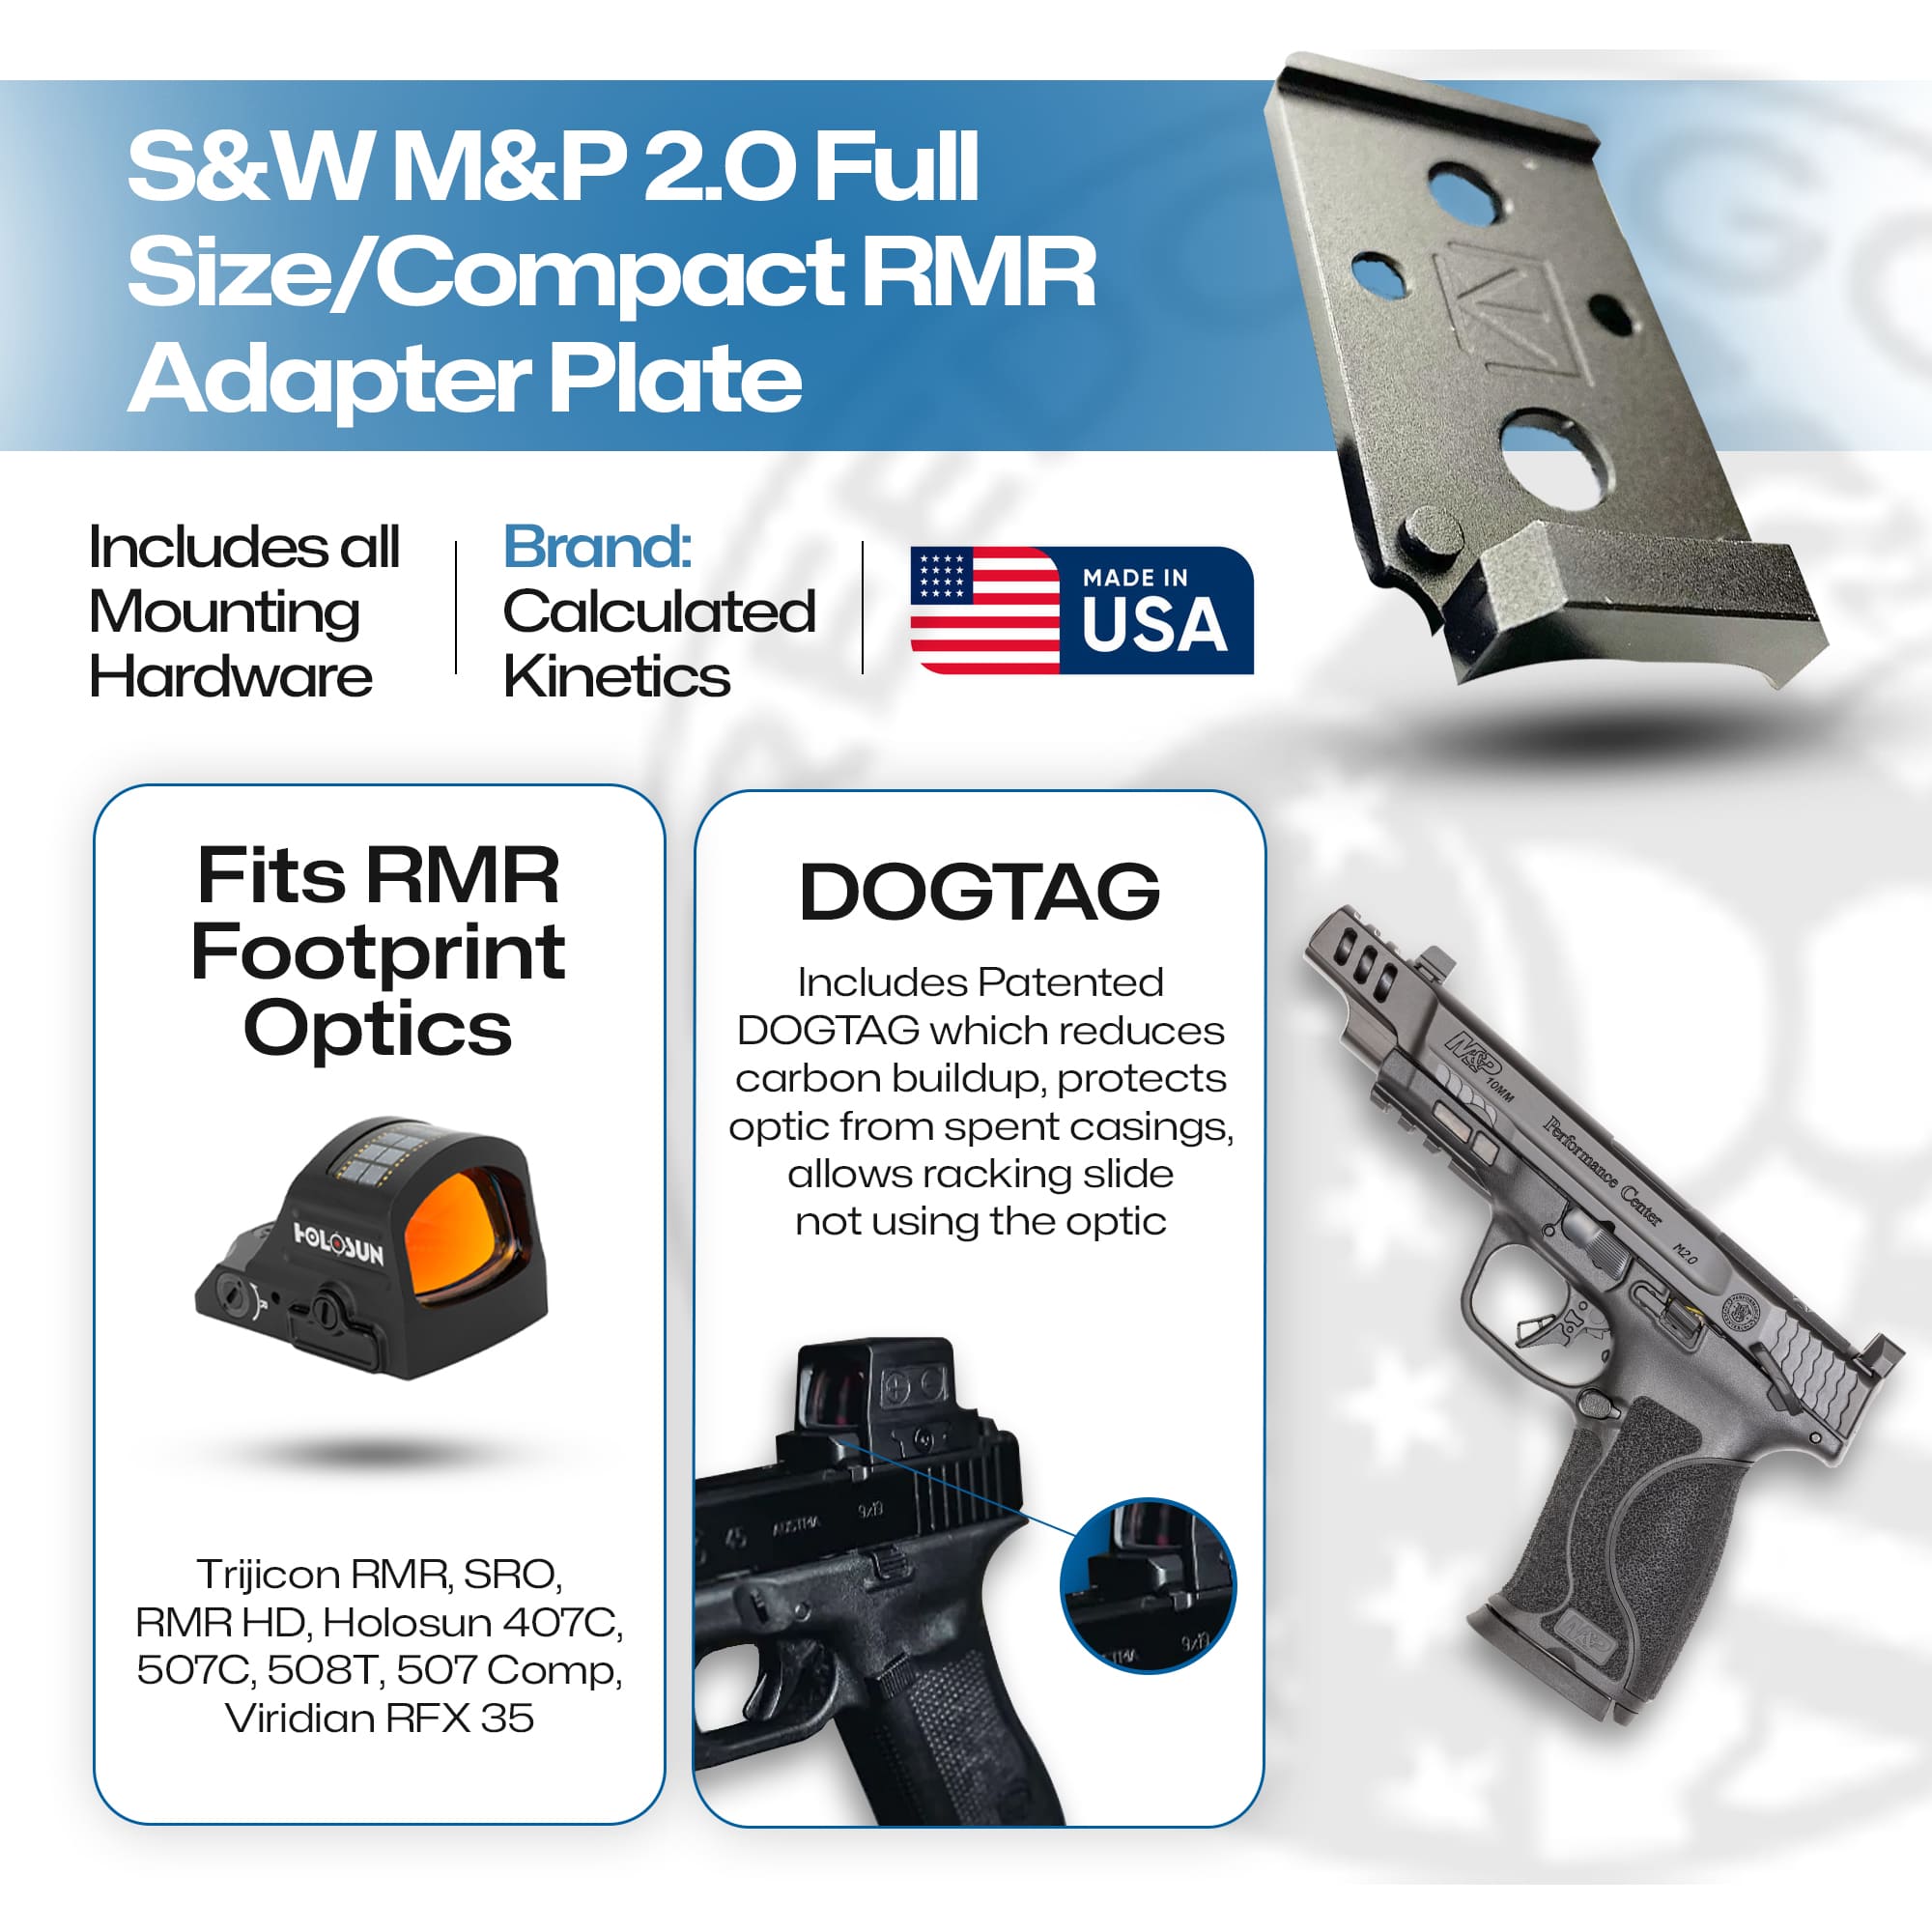 S&W M&P 2.0 Full Size/Compact RMR Adapter Plate (Does Not Fit SRO) - Aluminum - DOGTAG - Calculated Kinetics